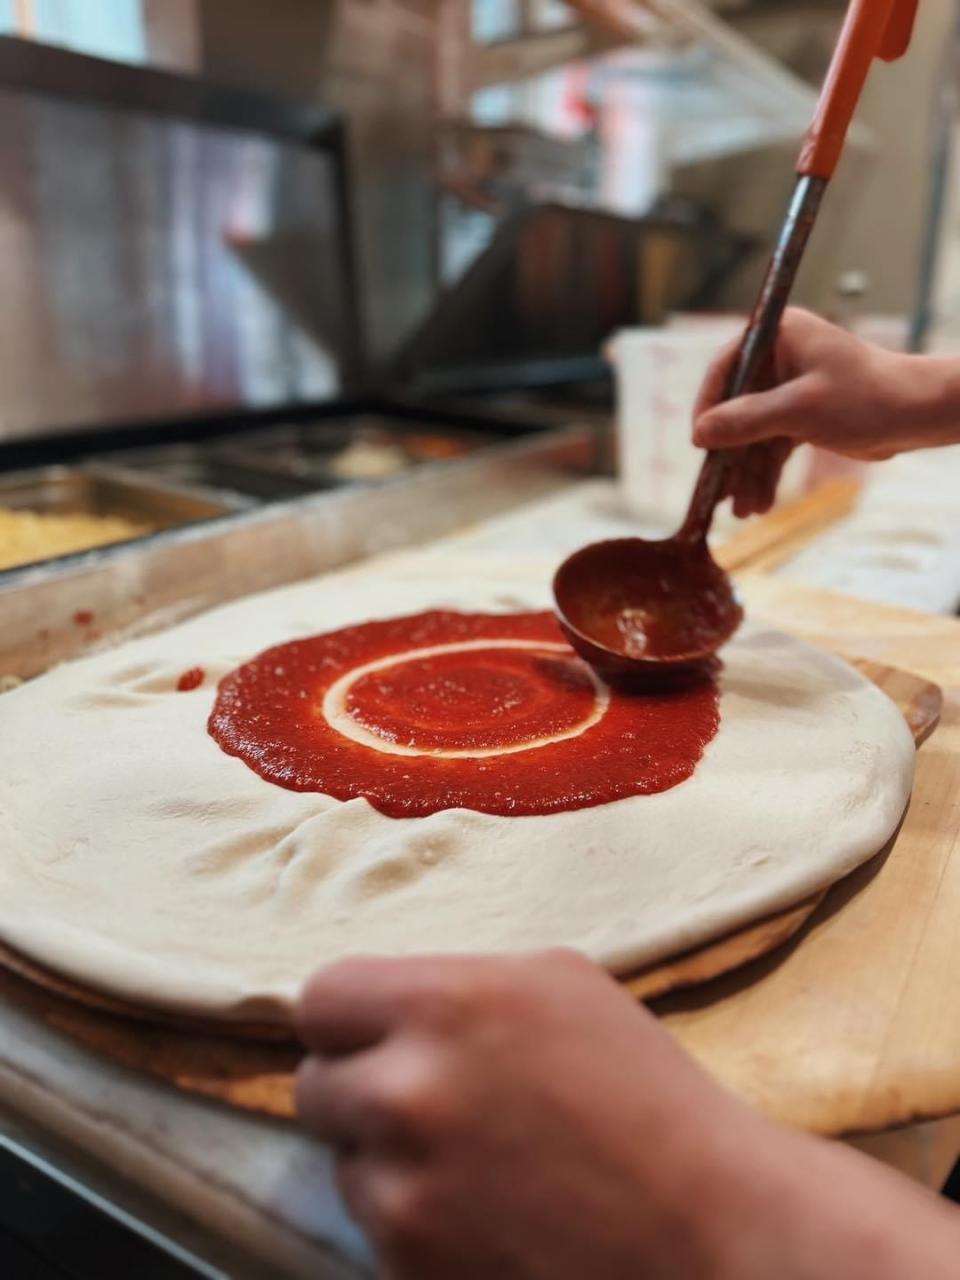 A Big Jay's Pizzeria employee spreads sauce on pizza dough.